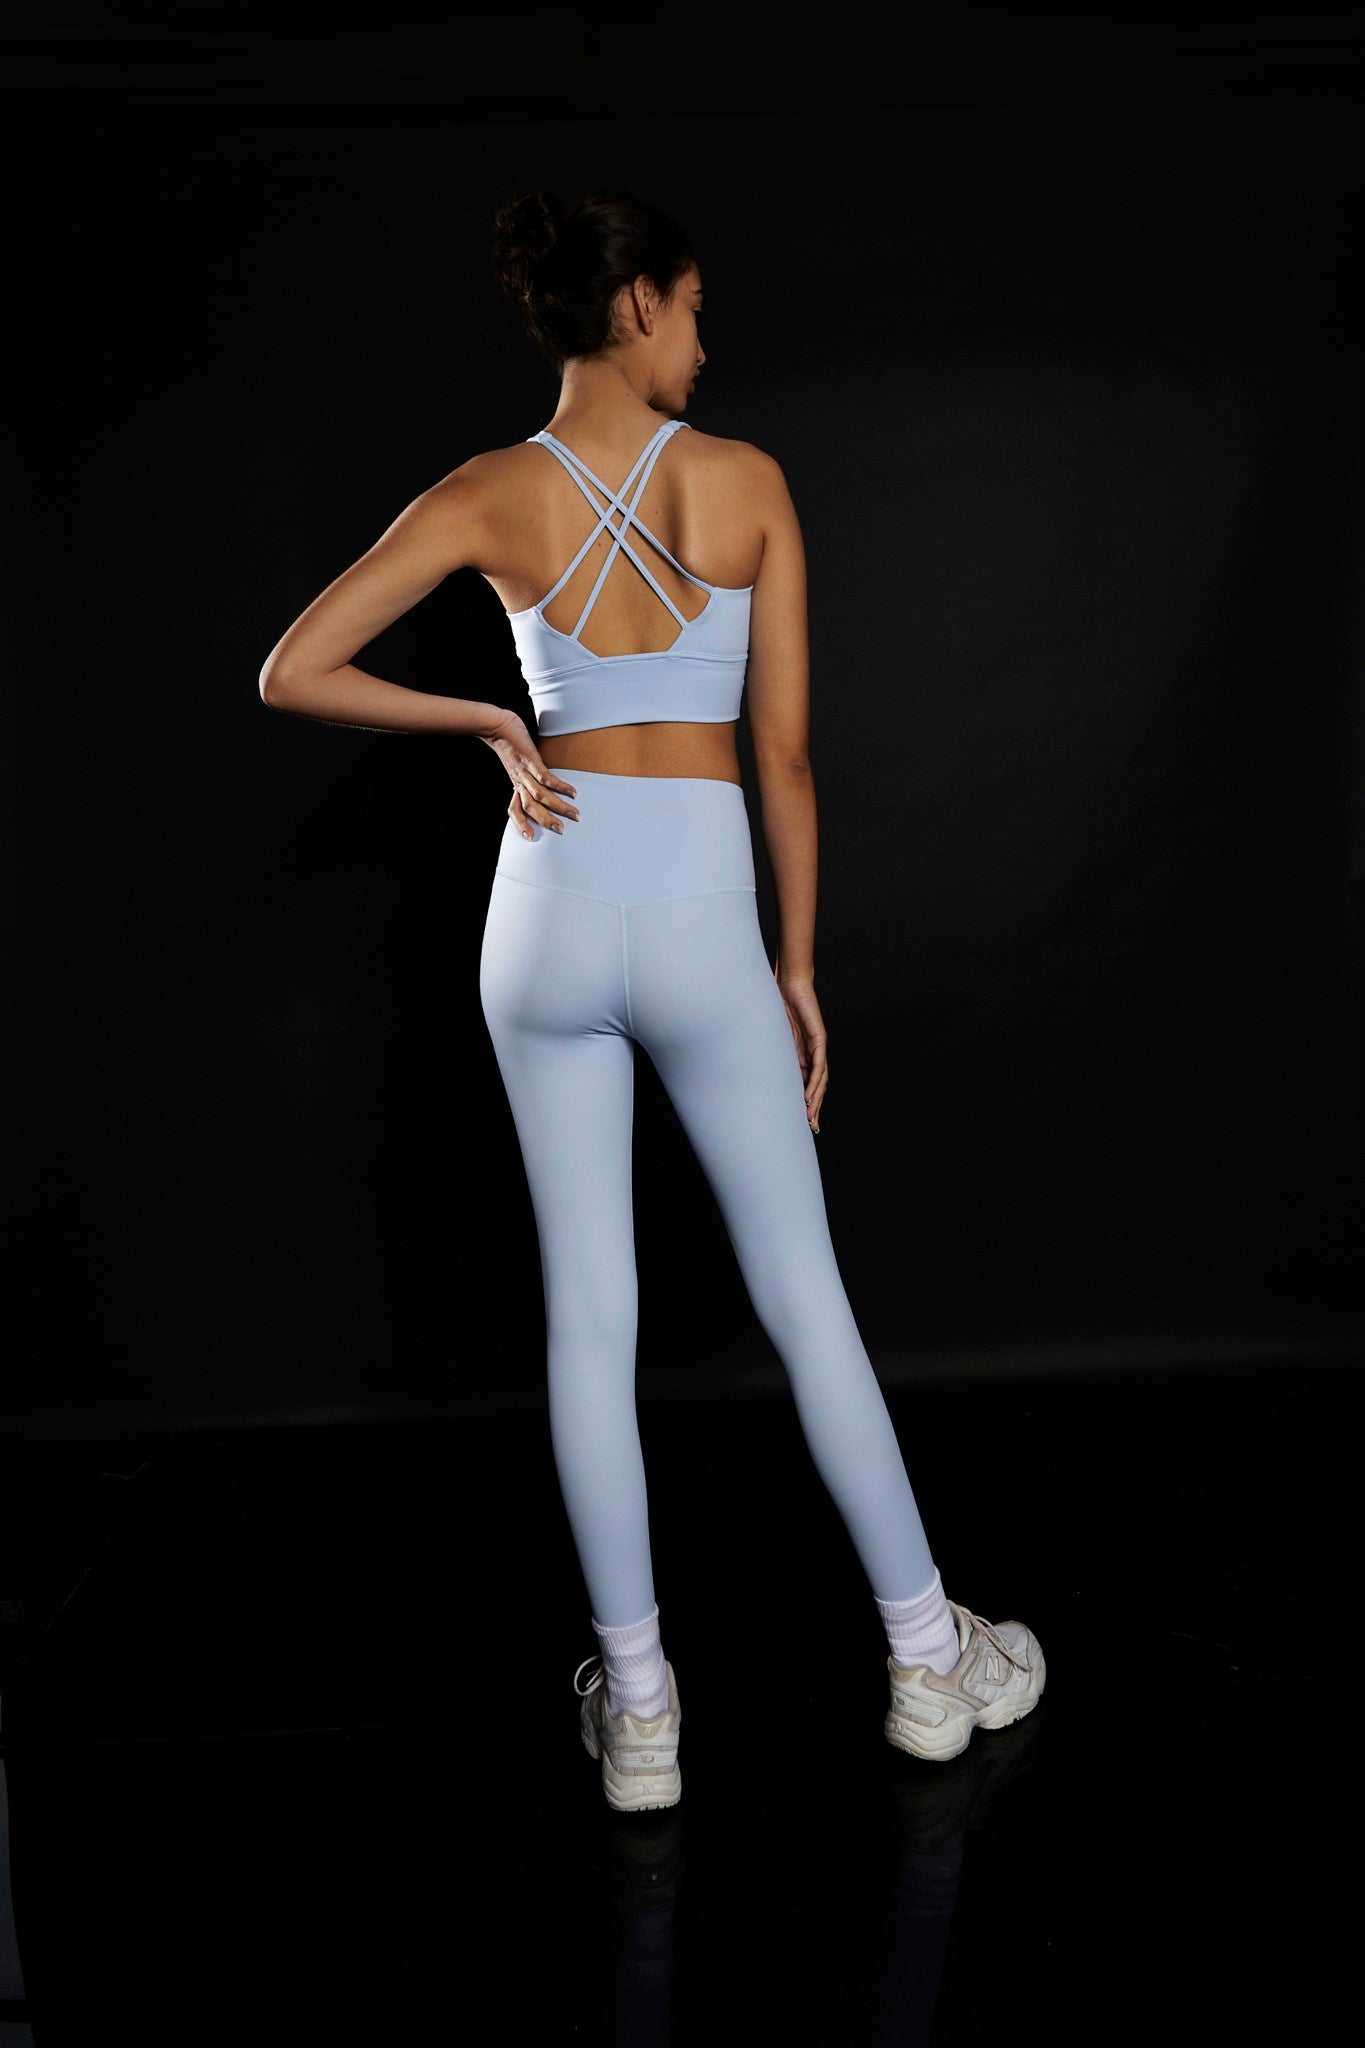 Does anyone know the name of these light blue leggings? Or the